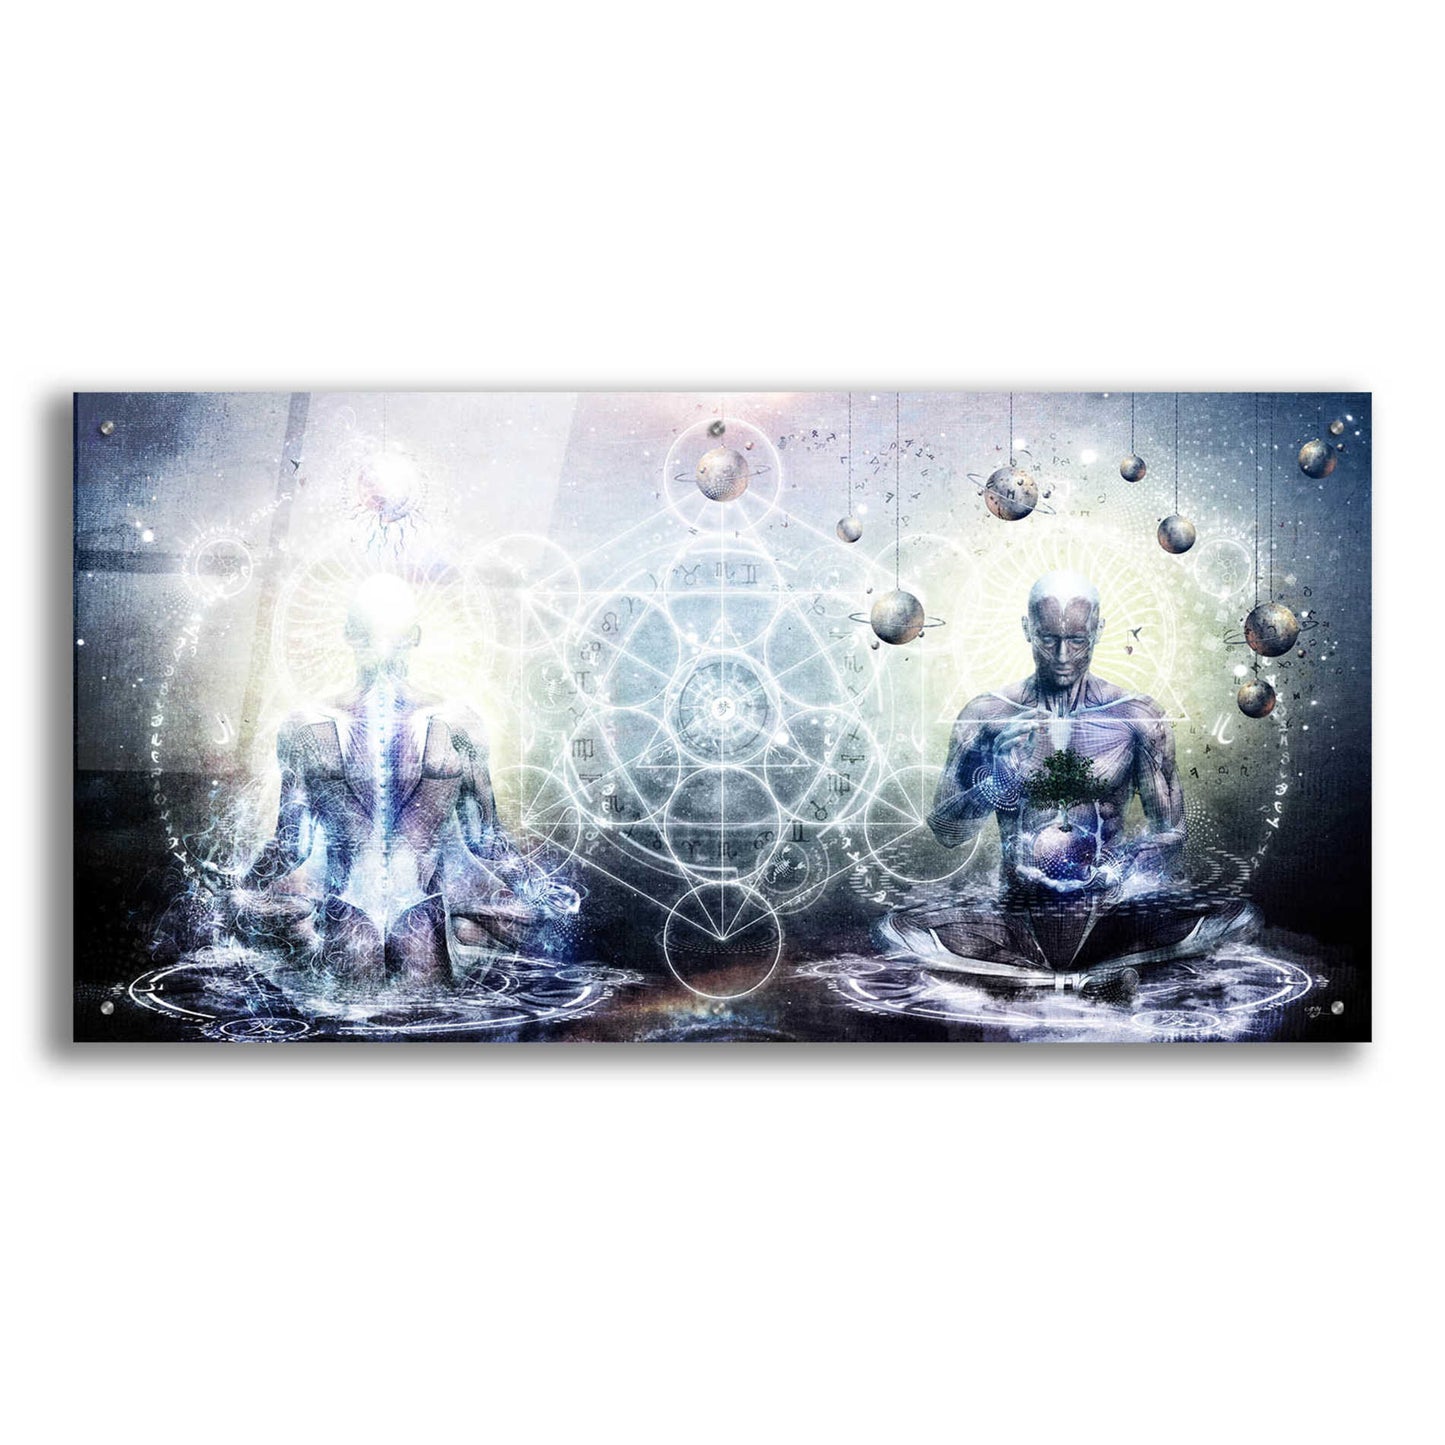 Epic Art 'Experience So Lucid, Discovery So Clear' by Cameron Gray, Acrylic Glass Wall Art,48x24